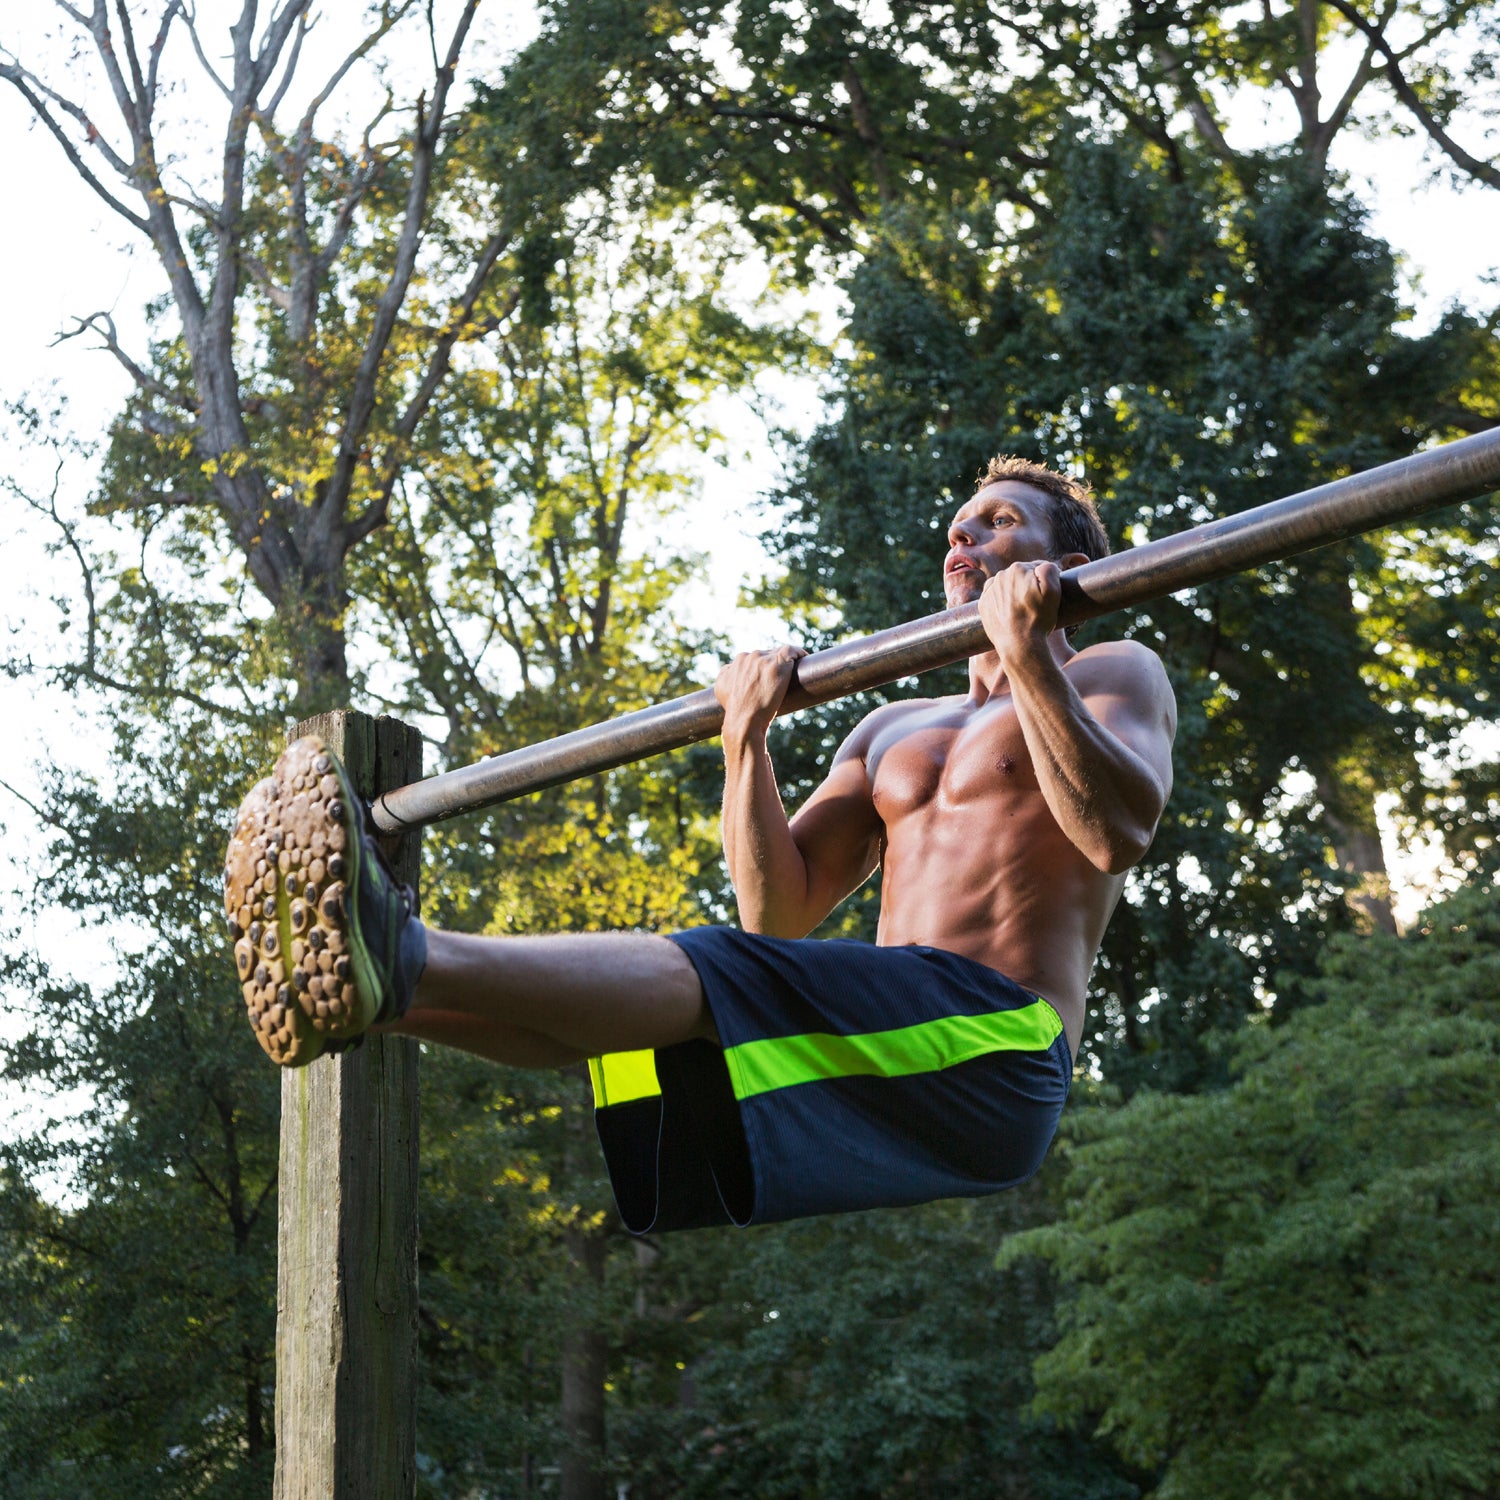 Premium Photo  Muscular man performing hanging leg raises exercise one of  the most effective ab exercises